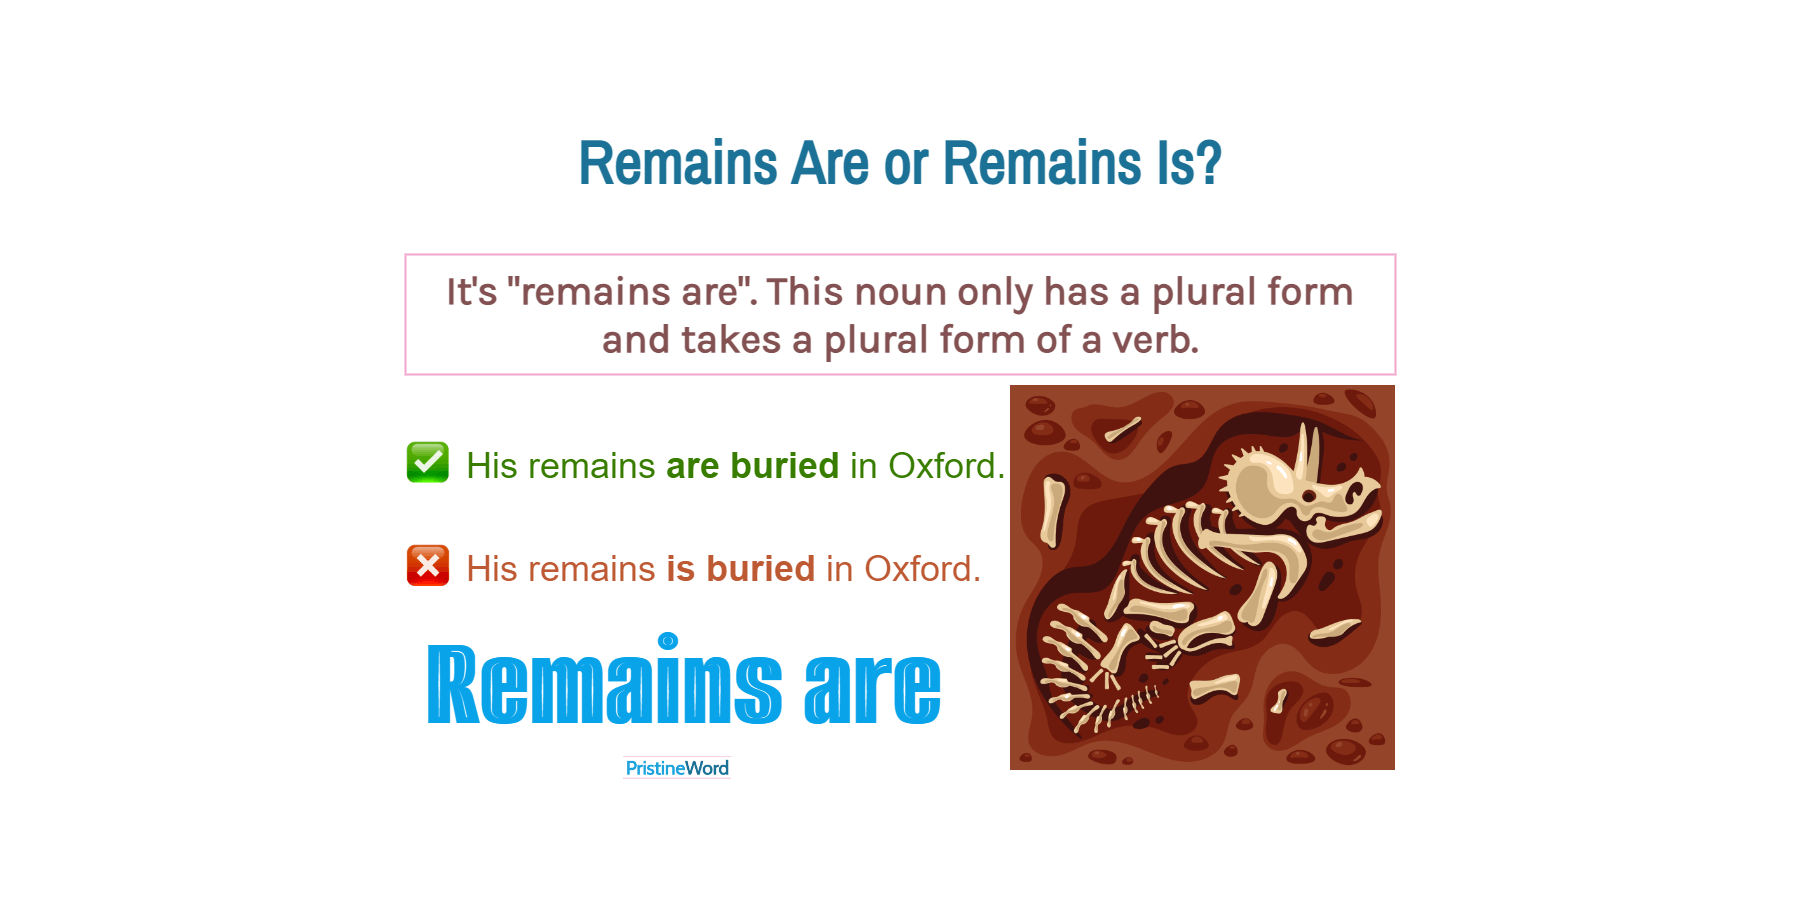 Remains Are Or Remains Is. Which Is Correct?